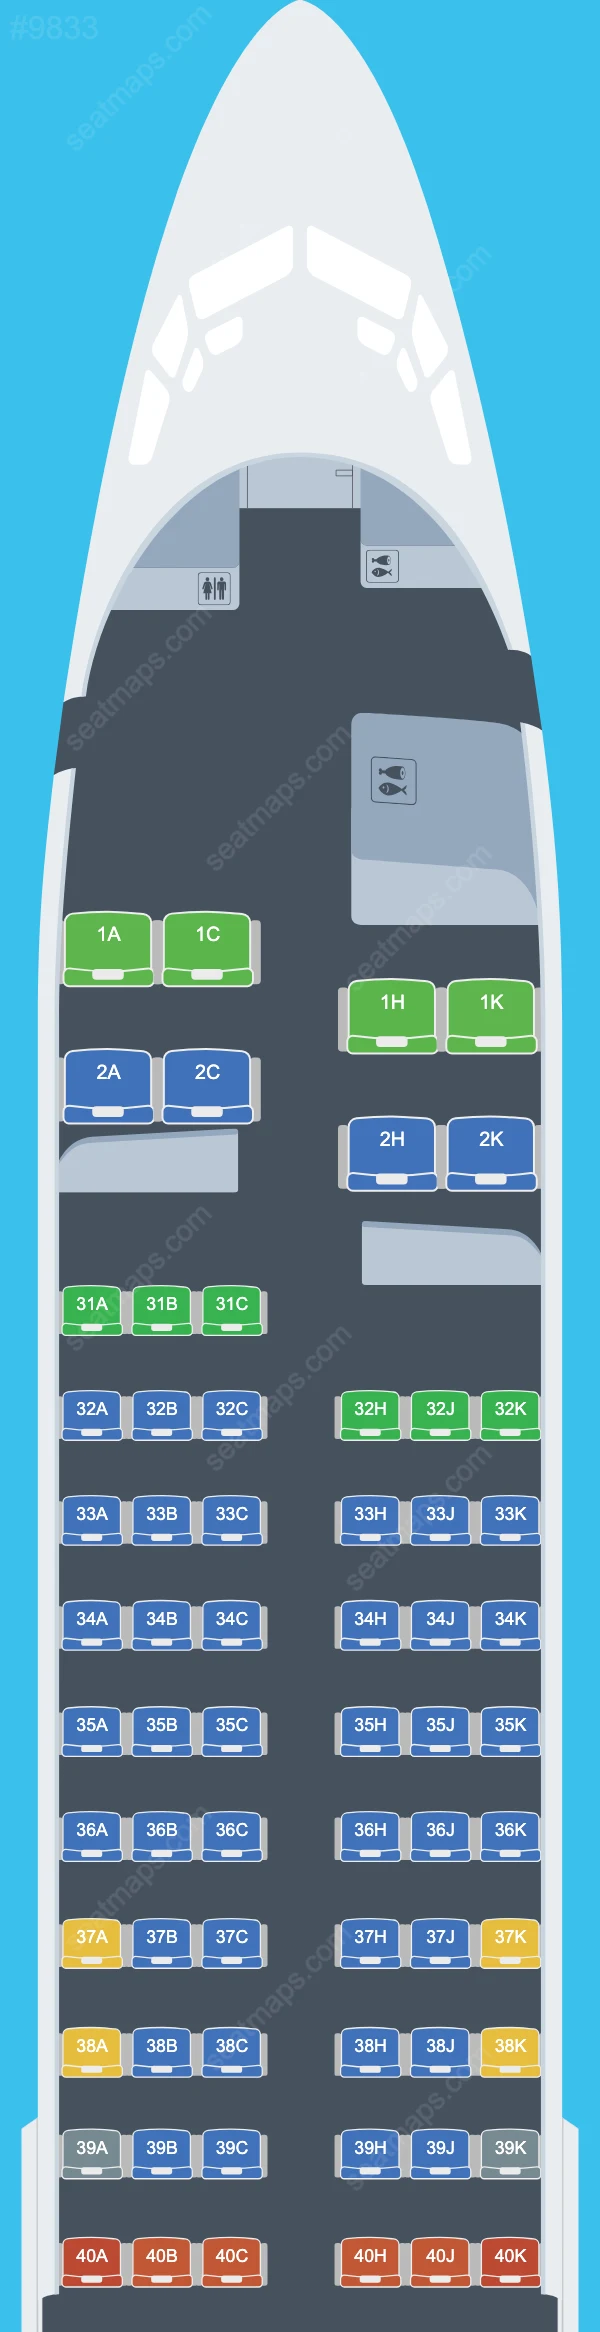 China Southern Boeing 737 Seat Maps 737-800 V.10